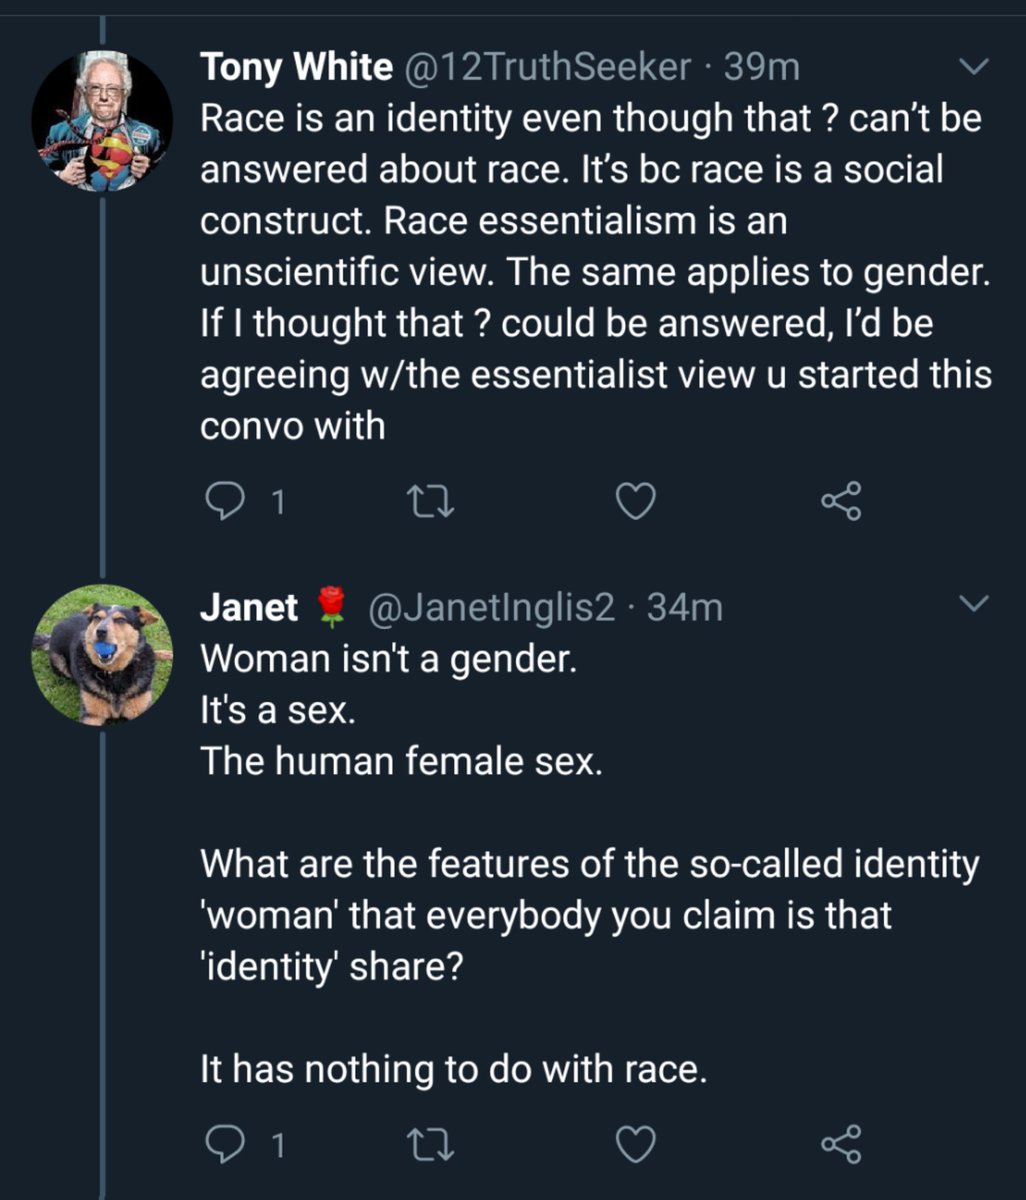 But ... race!?But ... gender!?But ... essentialism?But ... identity?Fool!